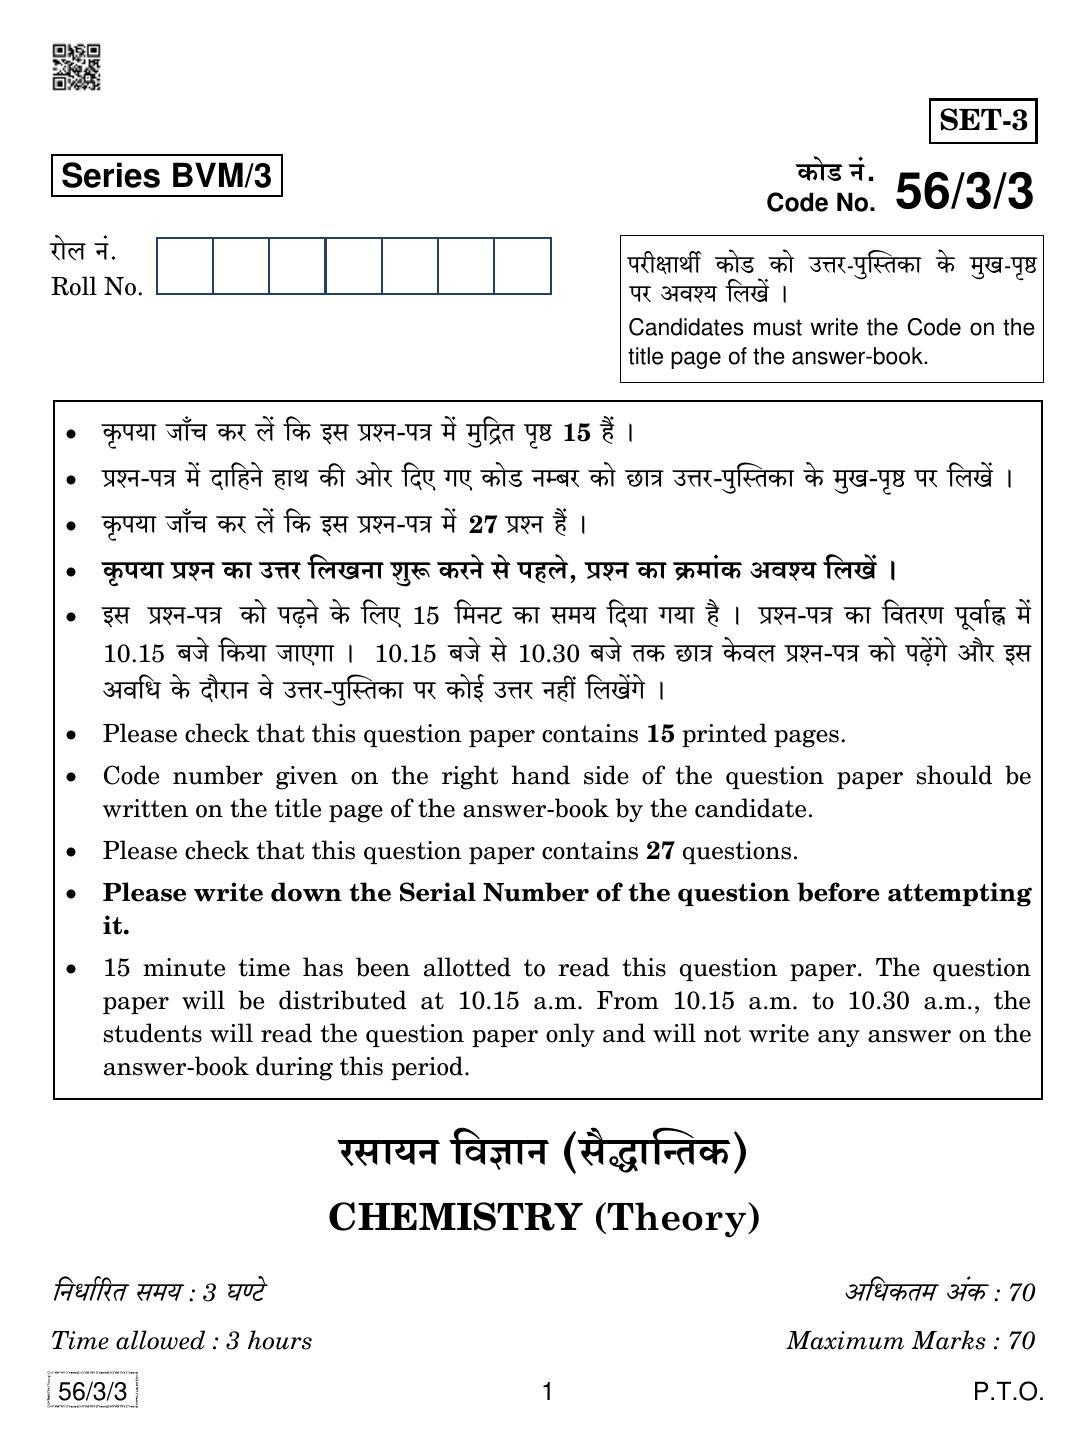 CBSE Class 12 56-3-3 Chemistry 2019 Question Paper - Page 1